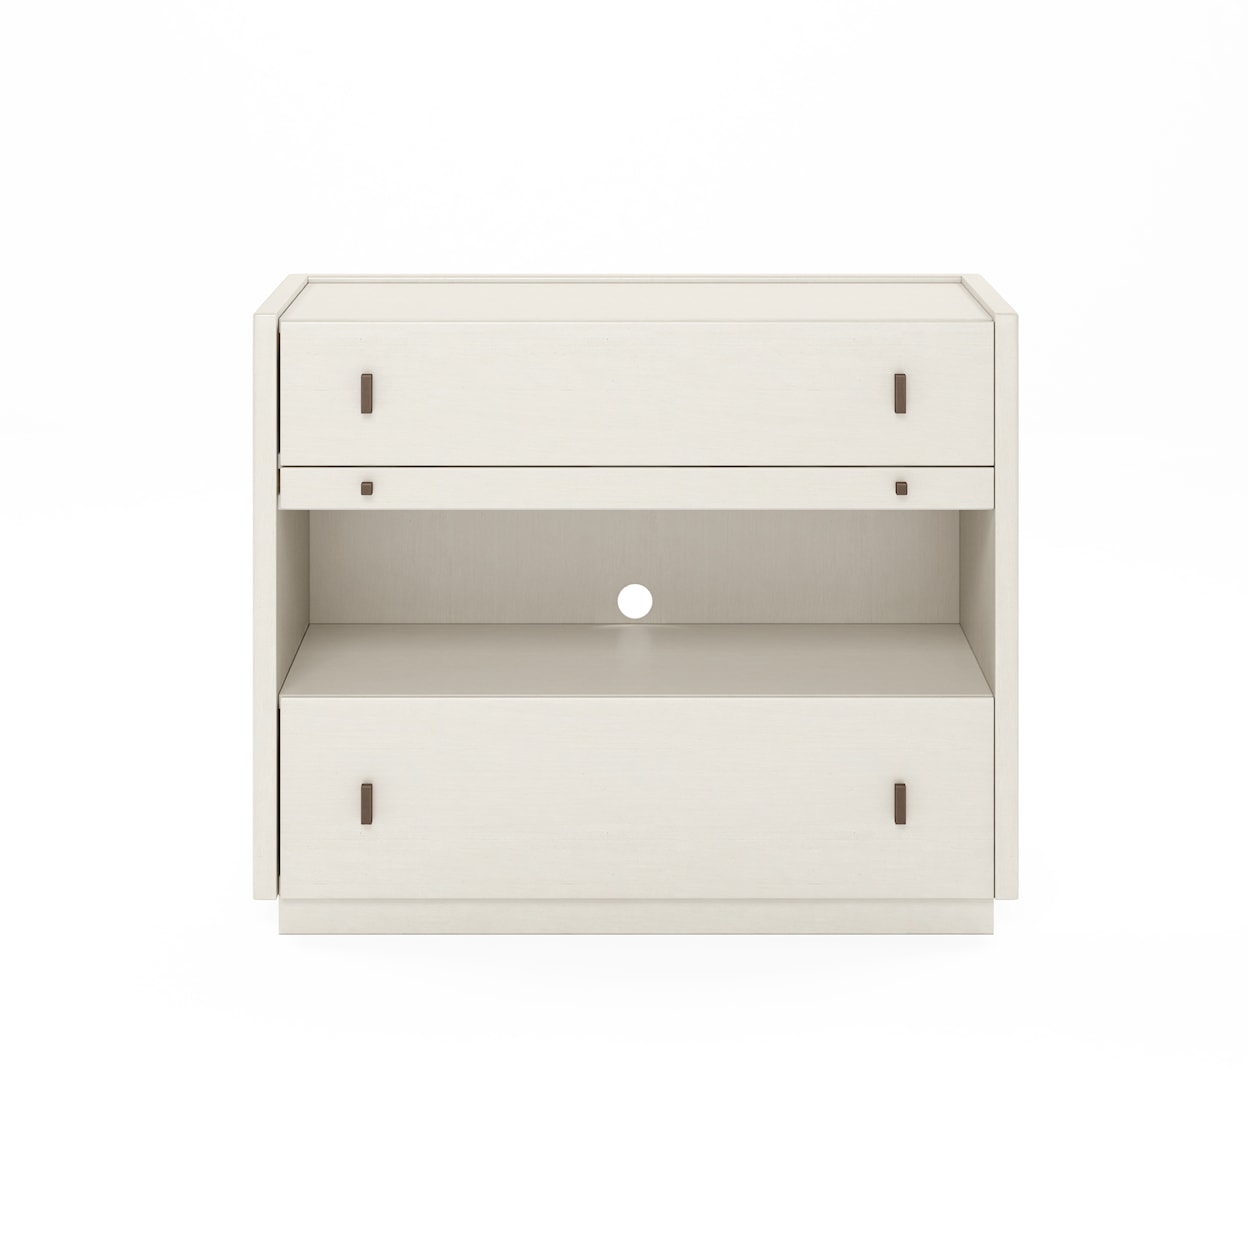 A.R.T. Furniture Inc Blanc 2-Drawer Bachelor's Chest